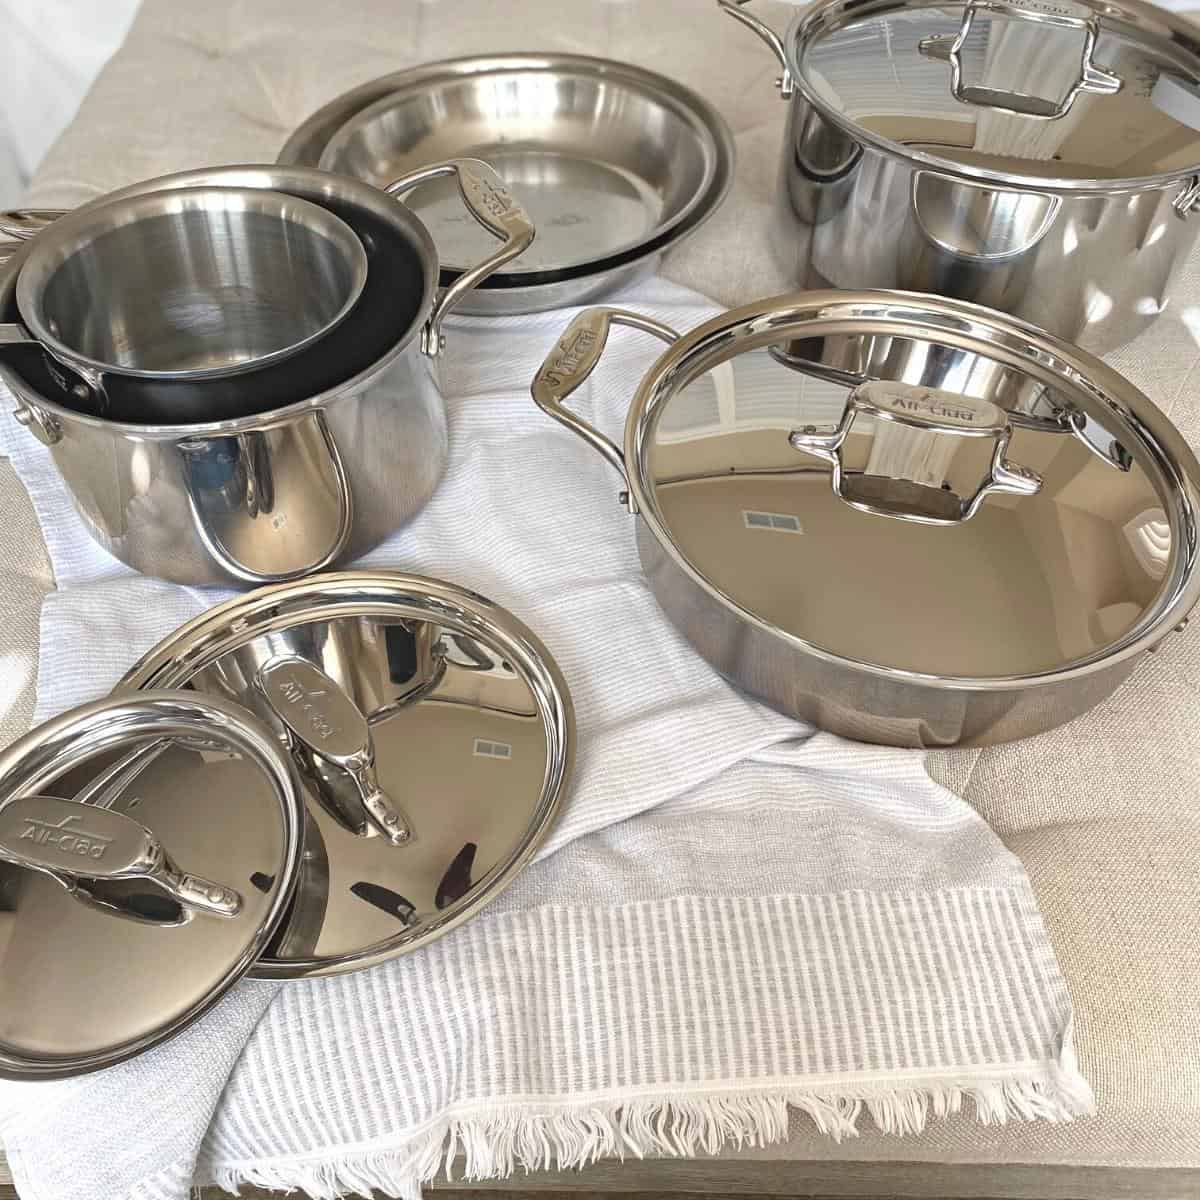 Stainless steel cookware set on a neutral cotton towel